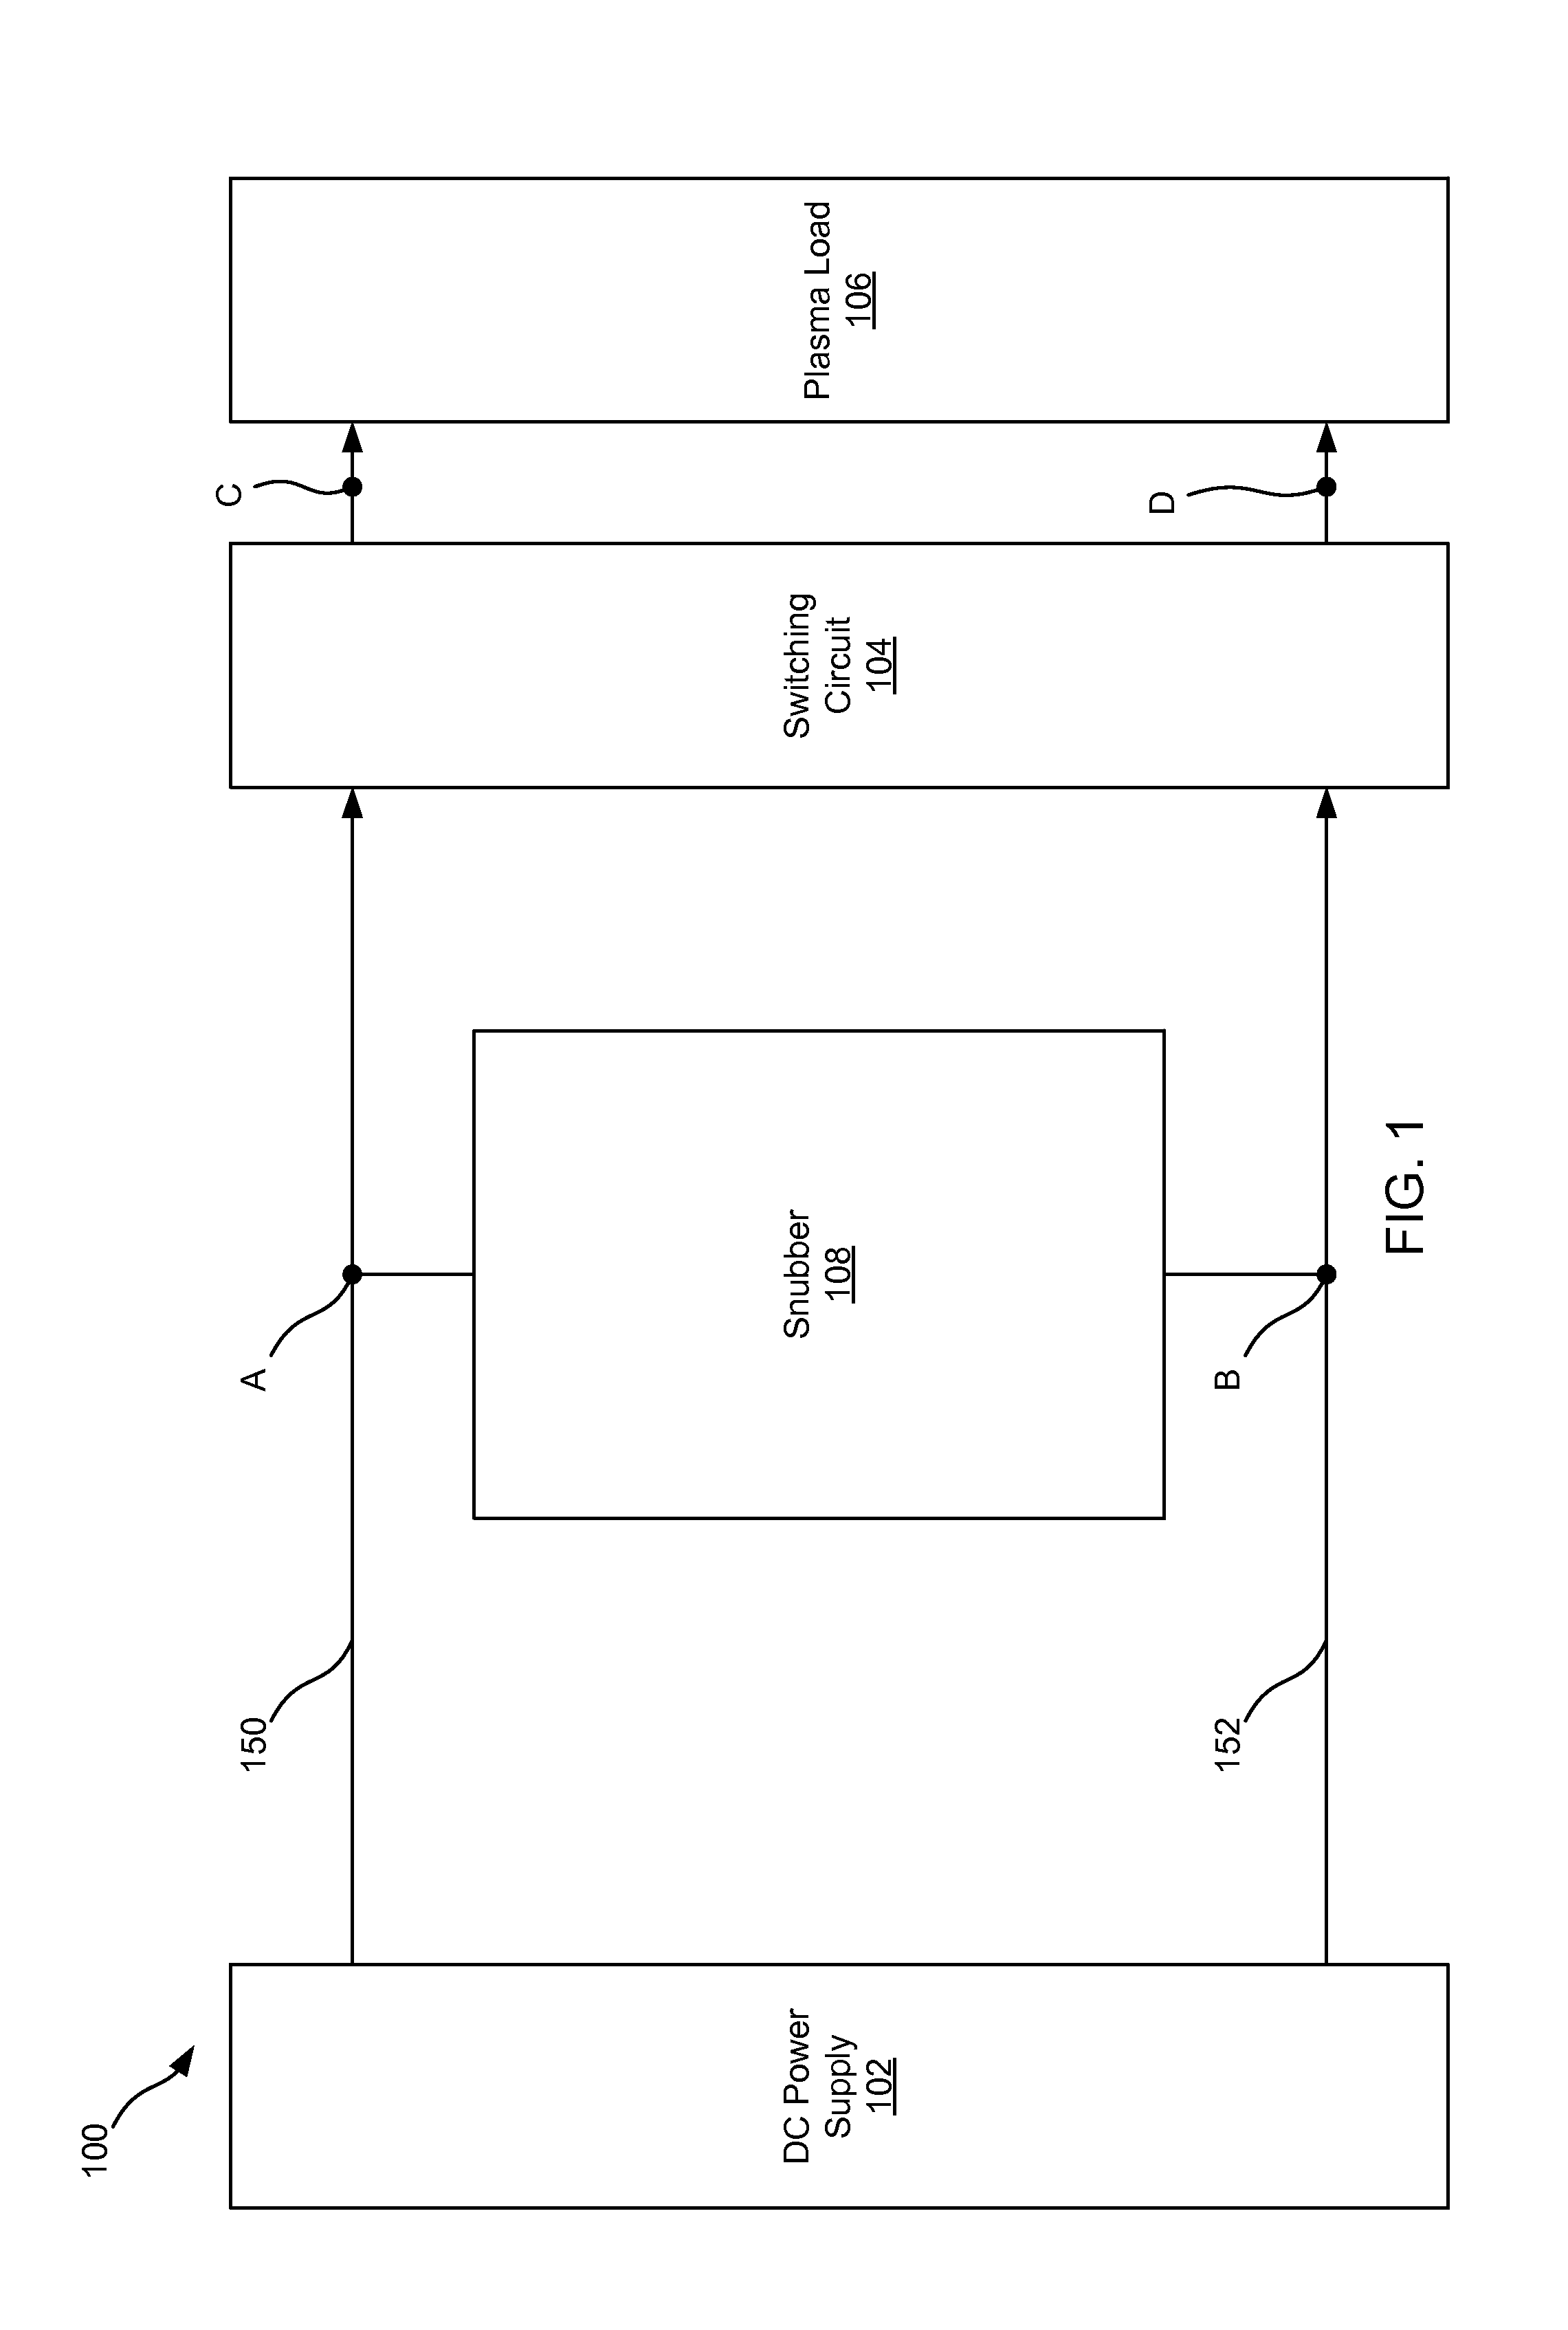 Adjustable non-dissipative voltage boosting snubber network for achieving large boost voltages